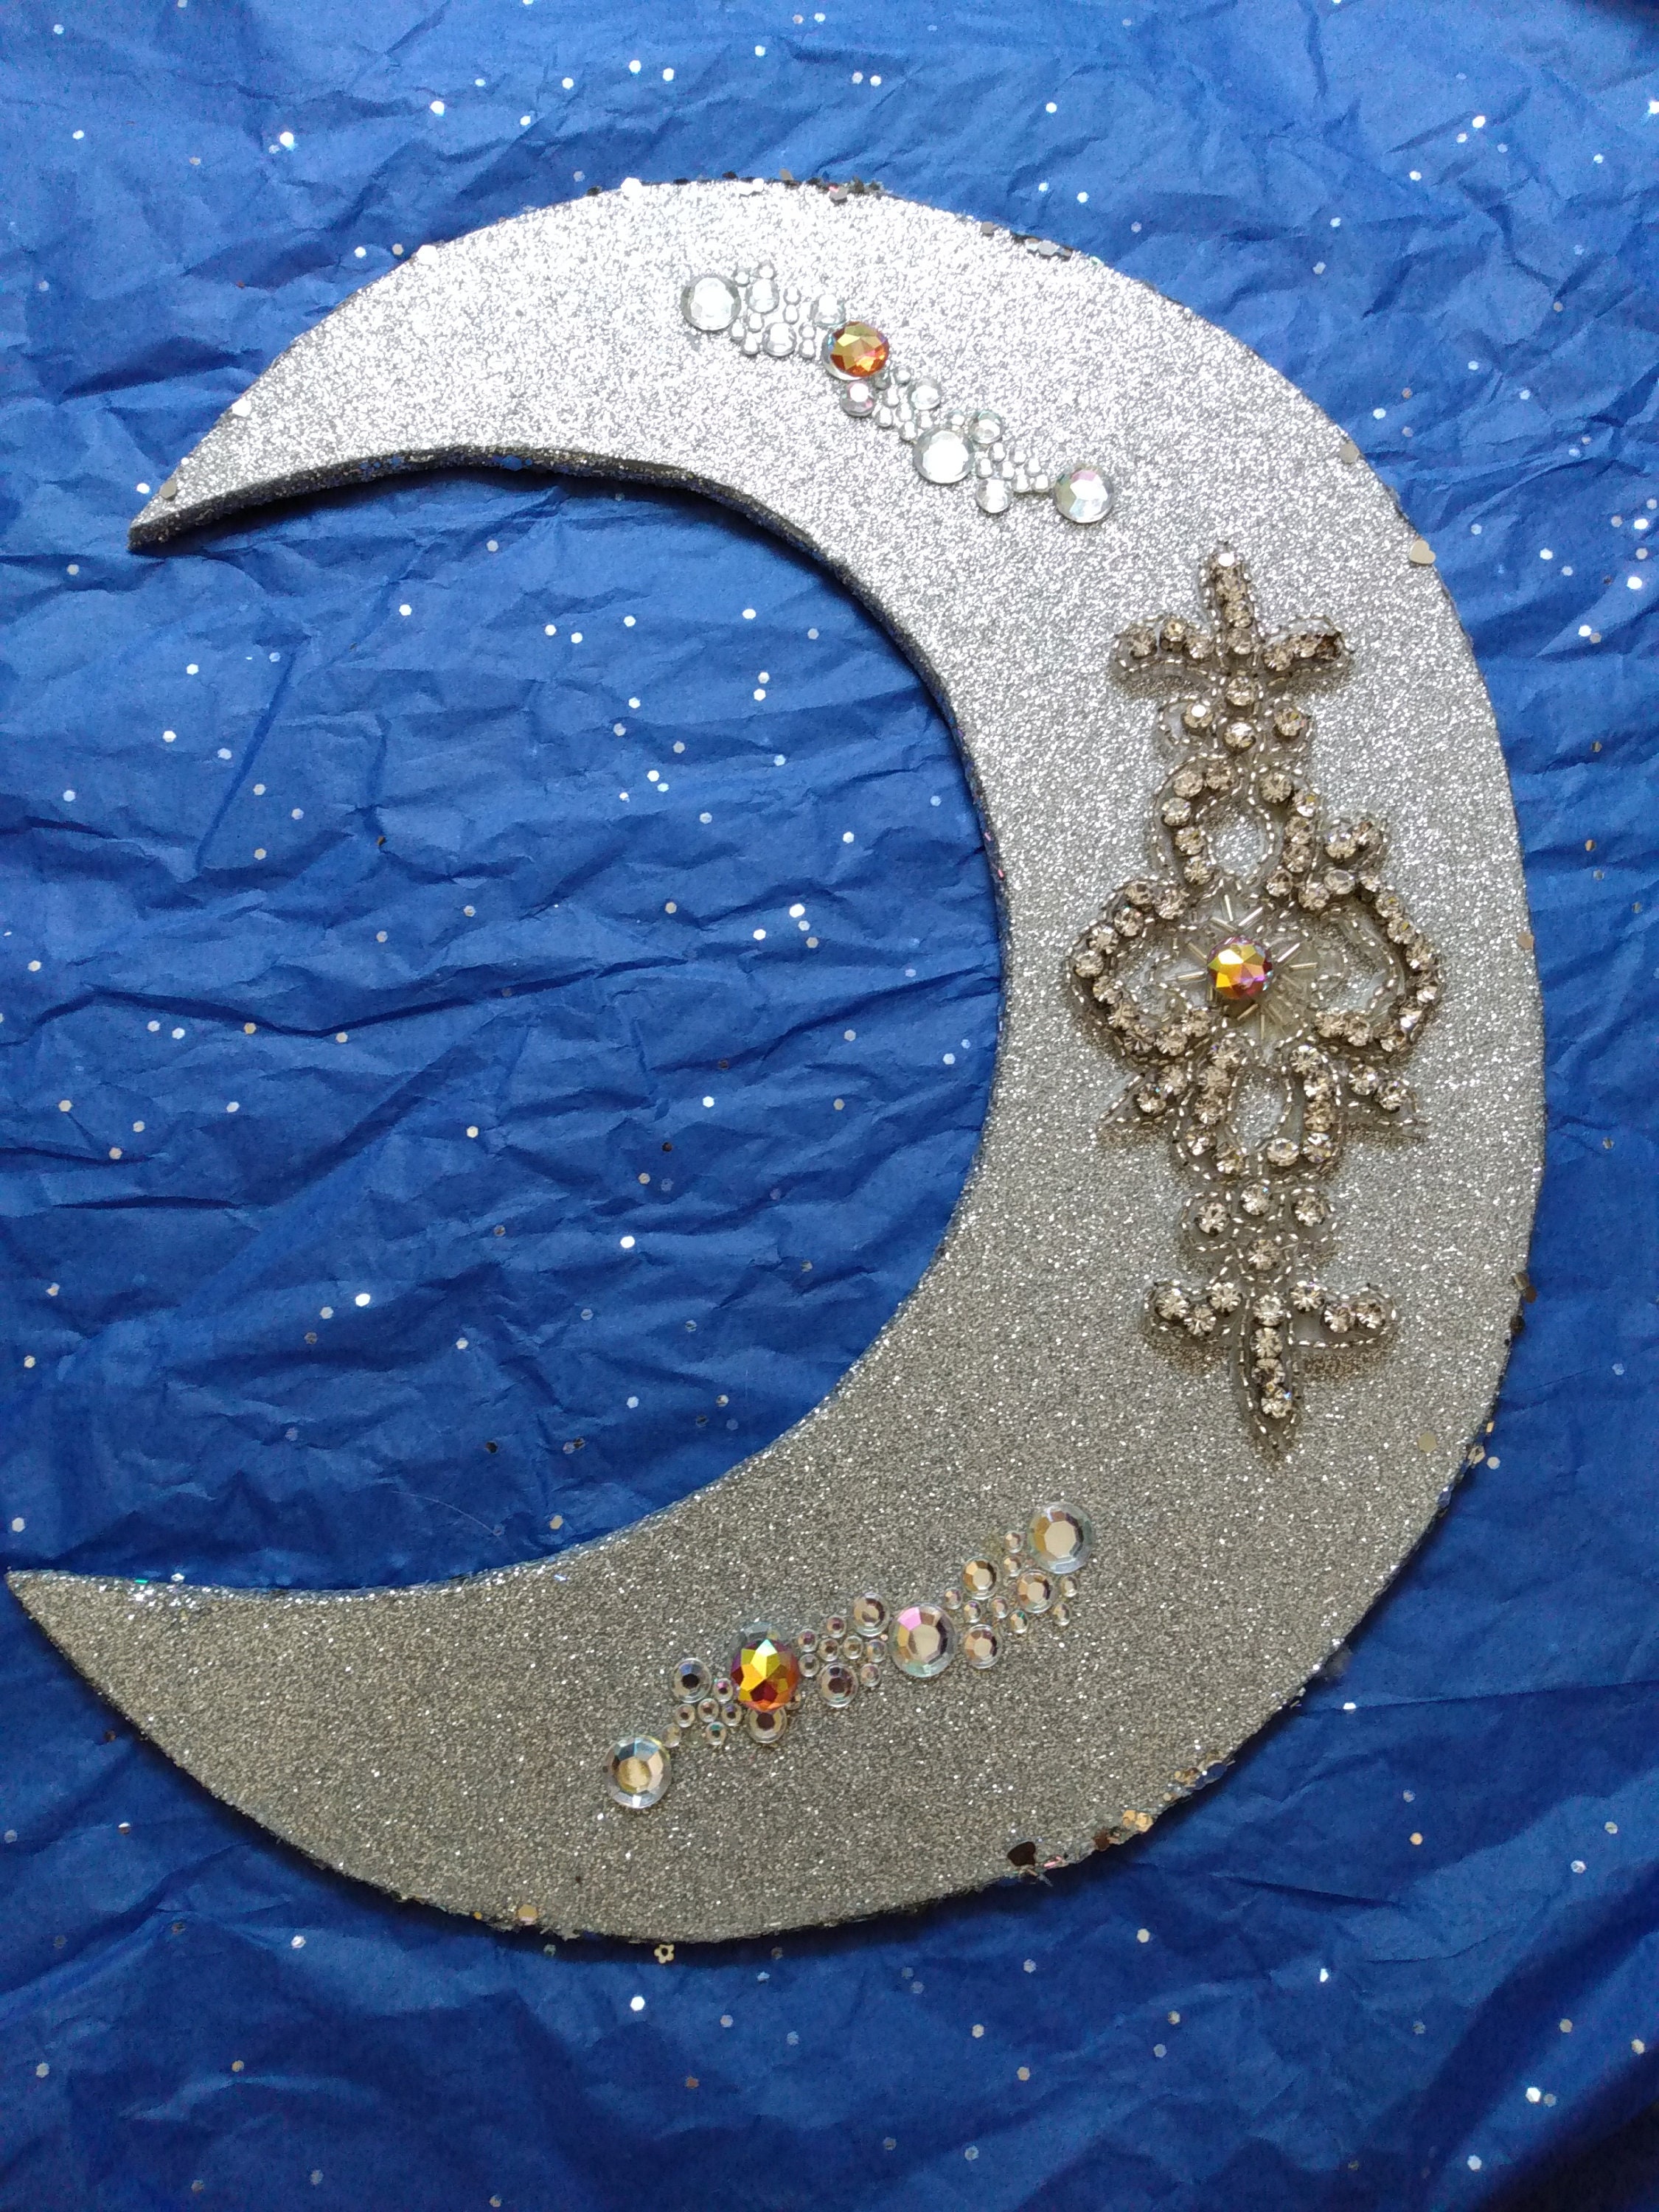 CRESCENT CUSHION Gothic pillowcase with moon and stars - Restyle